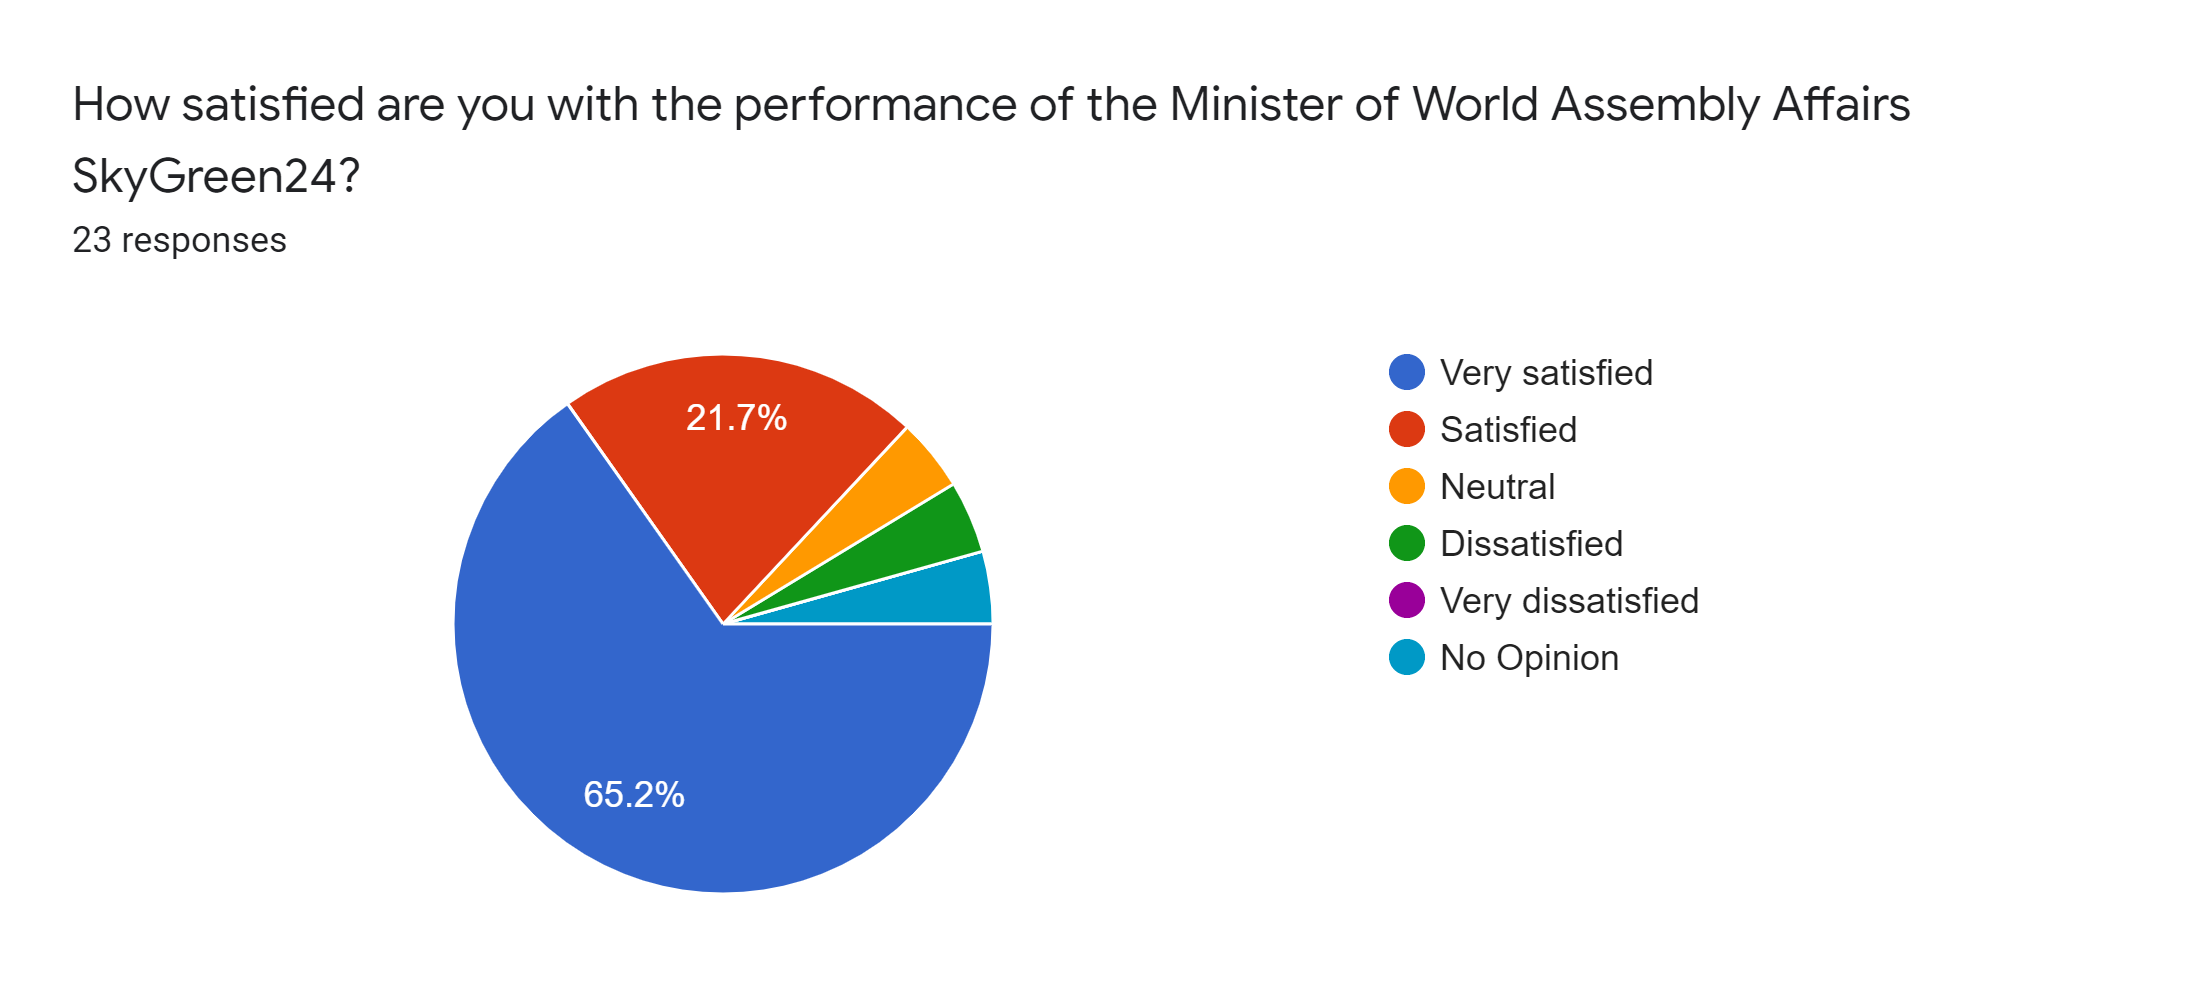 Forms response chart. Question title: How satisfied are you with the performance of the Minister of World Assembly Affairs SkyGreen24?. Number of responses: 23 responses.